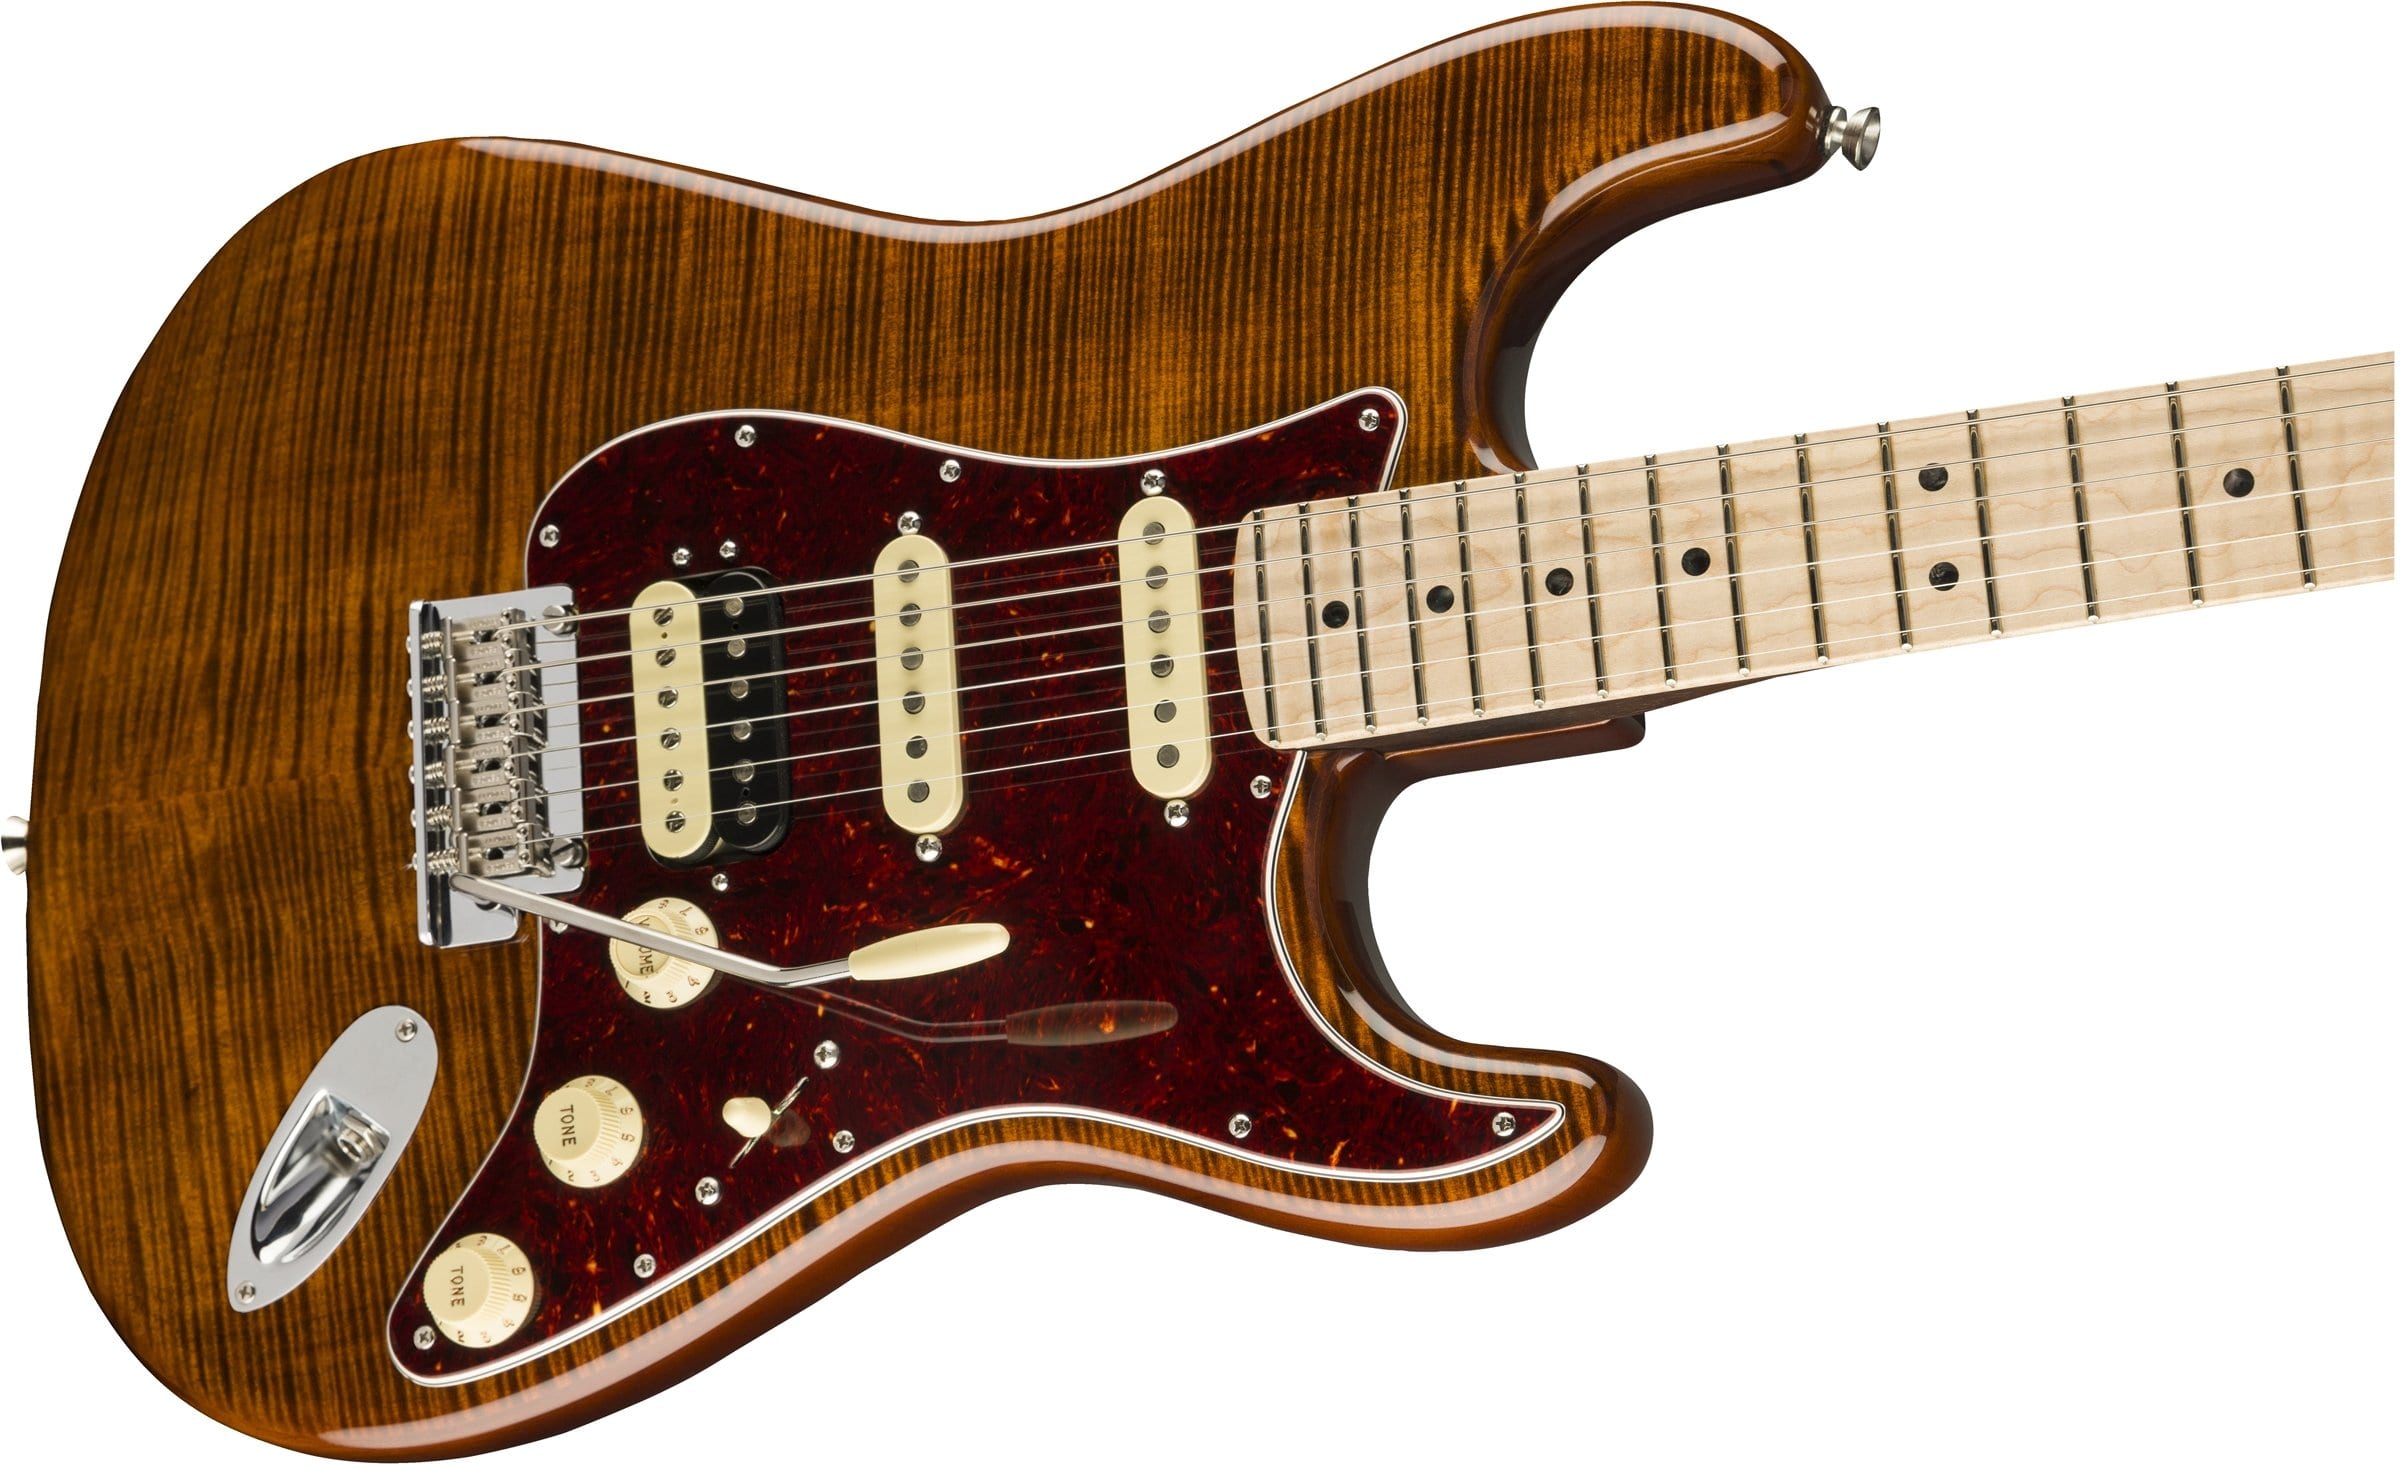 Fender released their new Flame Maple Top Stratocaster.